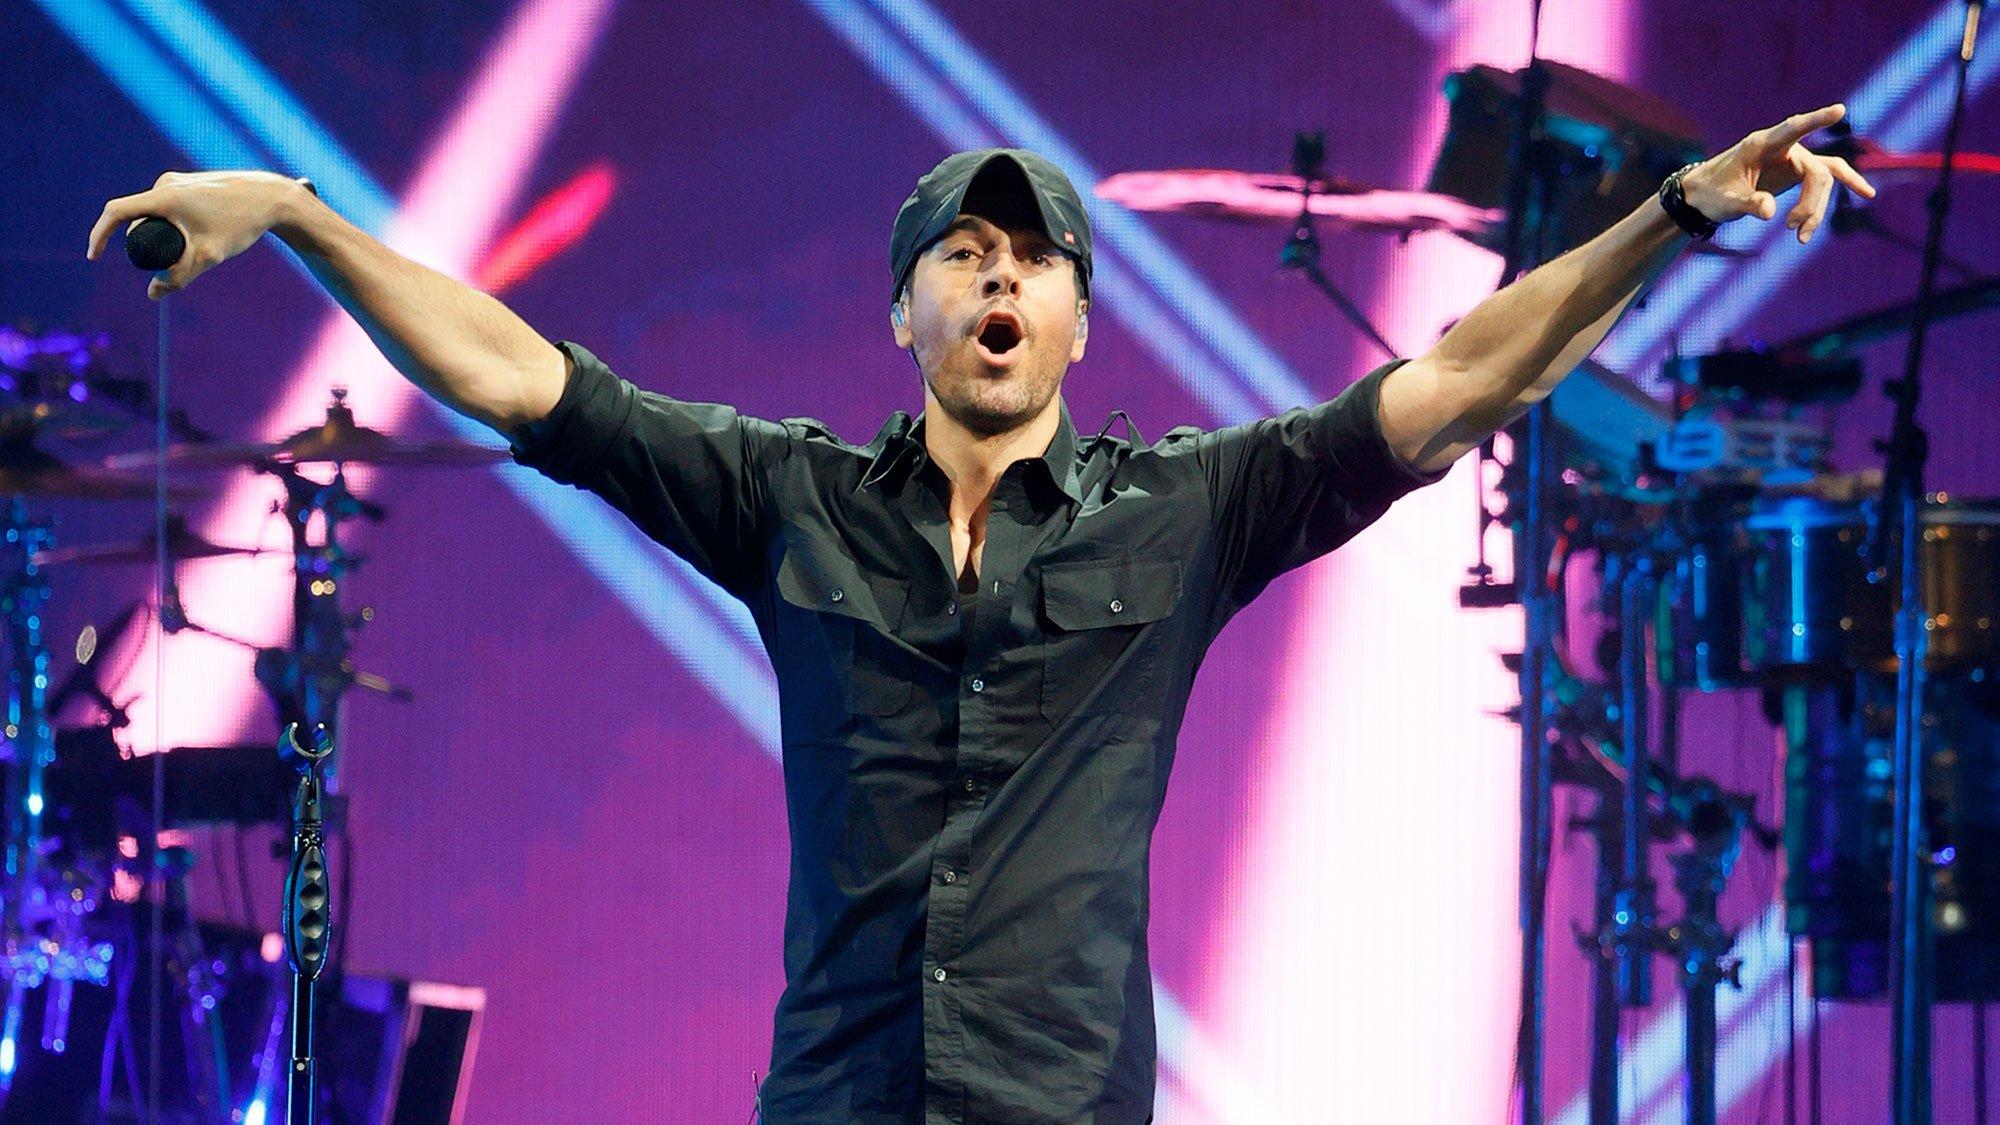 Enrique Iglesias stands with his arms out on stage during the opening night of the Enrique Iglesias and Ricky Martin Live in Concert tour at MGM Grand Garden Arena on September 25, 2021 in Las Vegas, Nevada.